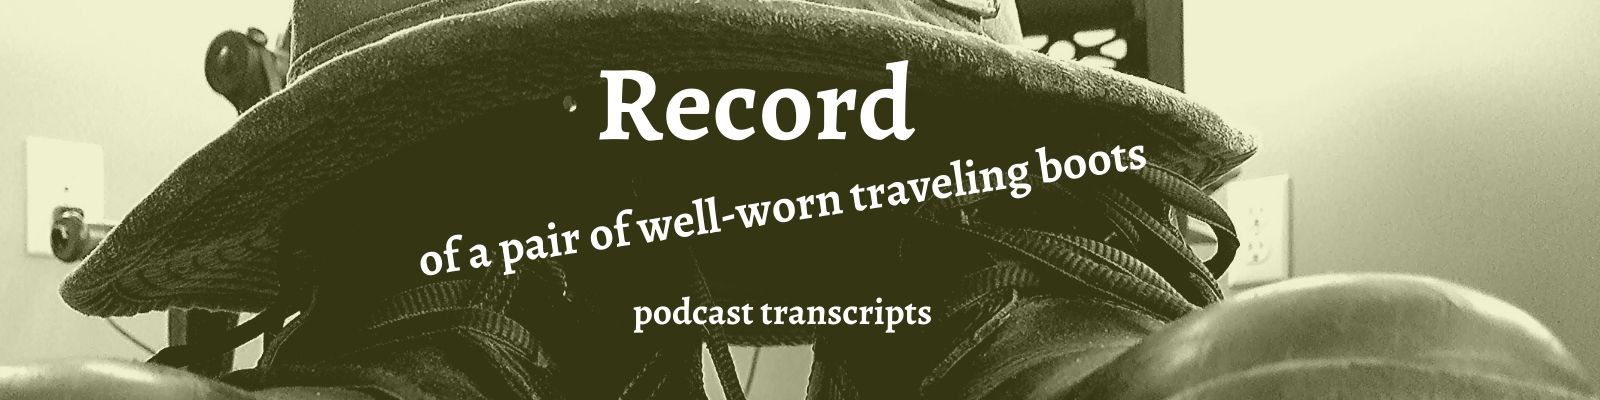 Transcripts: A Record of a Pair of Well-Worn Traveling Boots